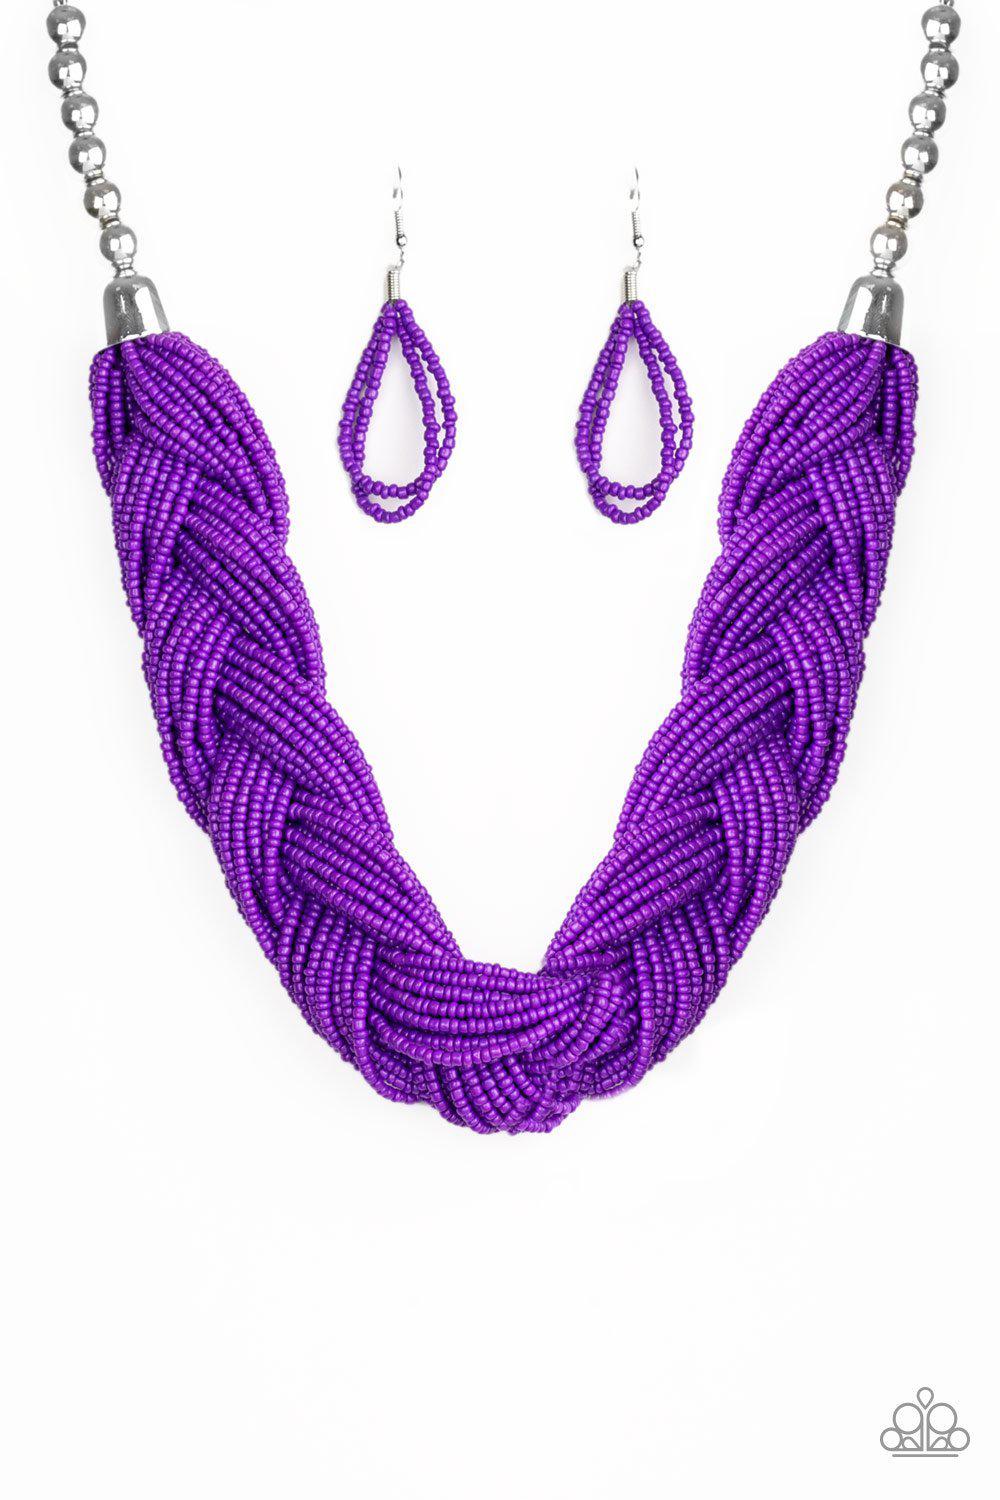 The Great Outback Purple Braided Seed Bead Necklace - Paparazzi Accessories-CarasShop.com - $5 Jewelry by Cara Jewels